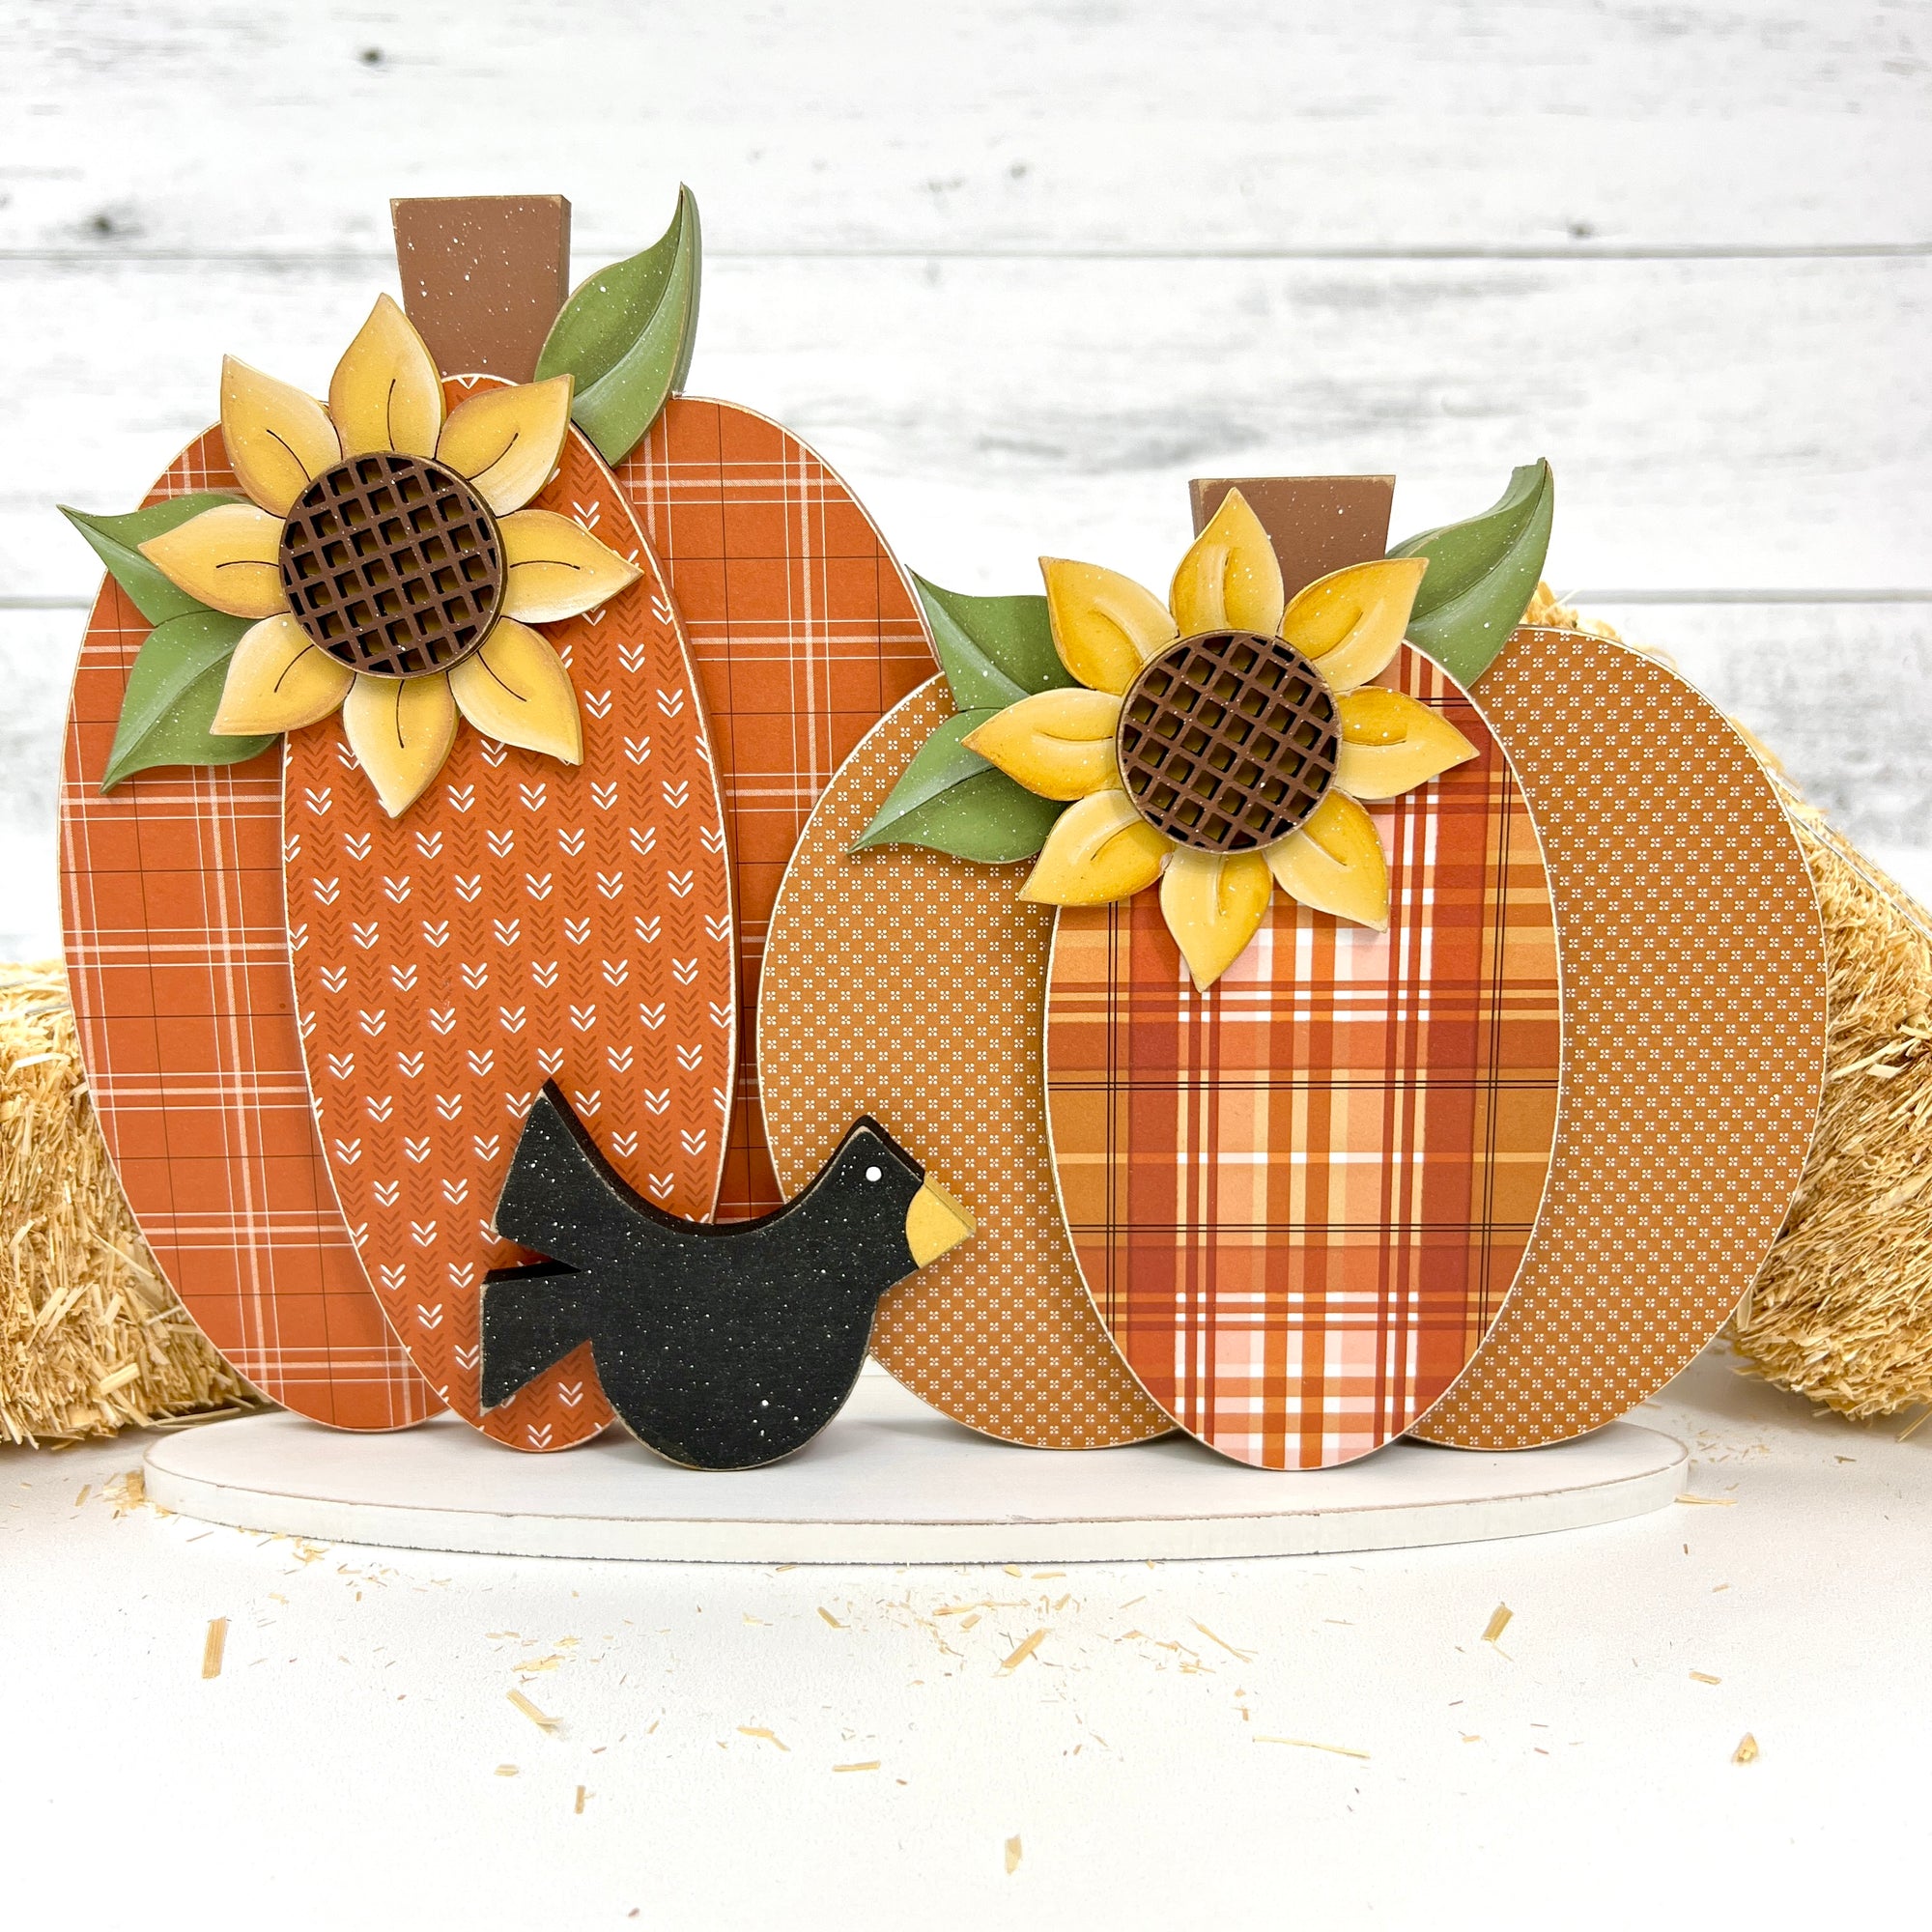 Set of two Fall plaid pumpkins with sunflowers and crows. Wood decor DIY fall craft kit.